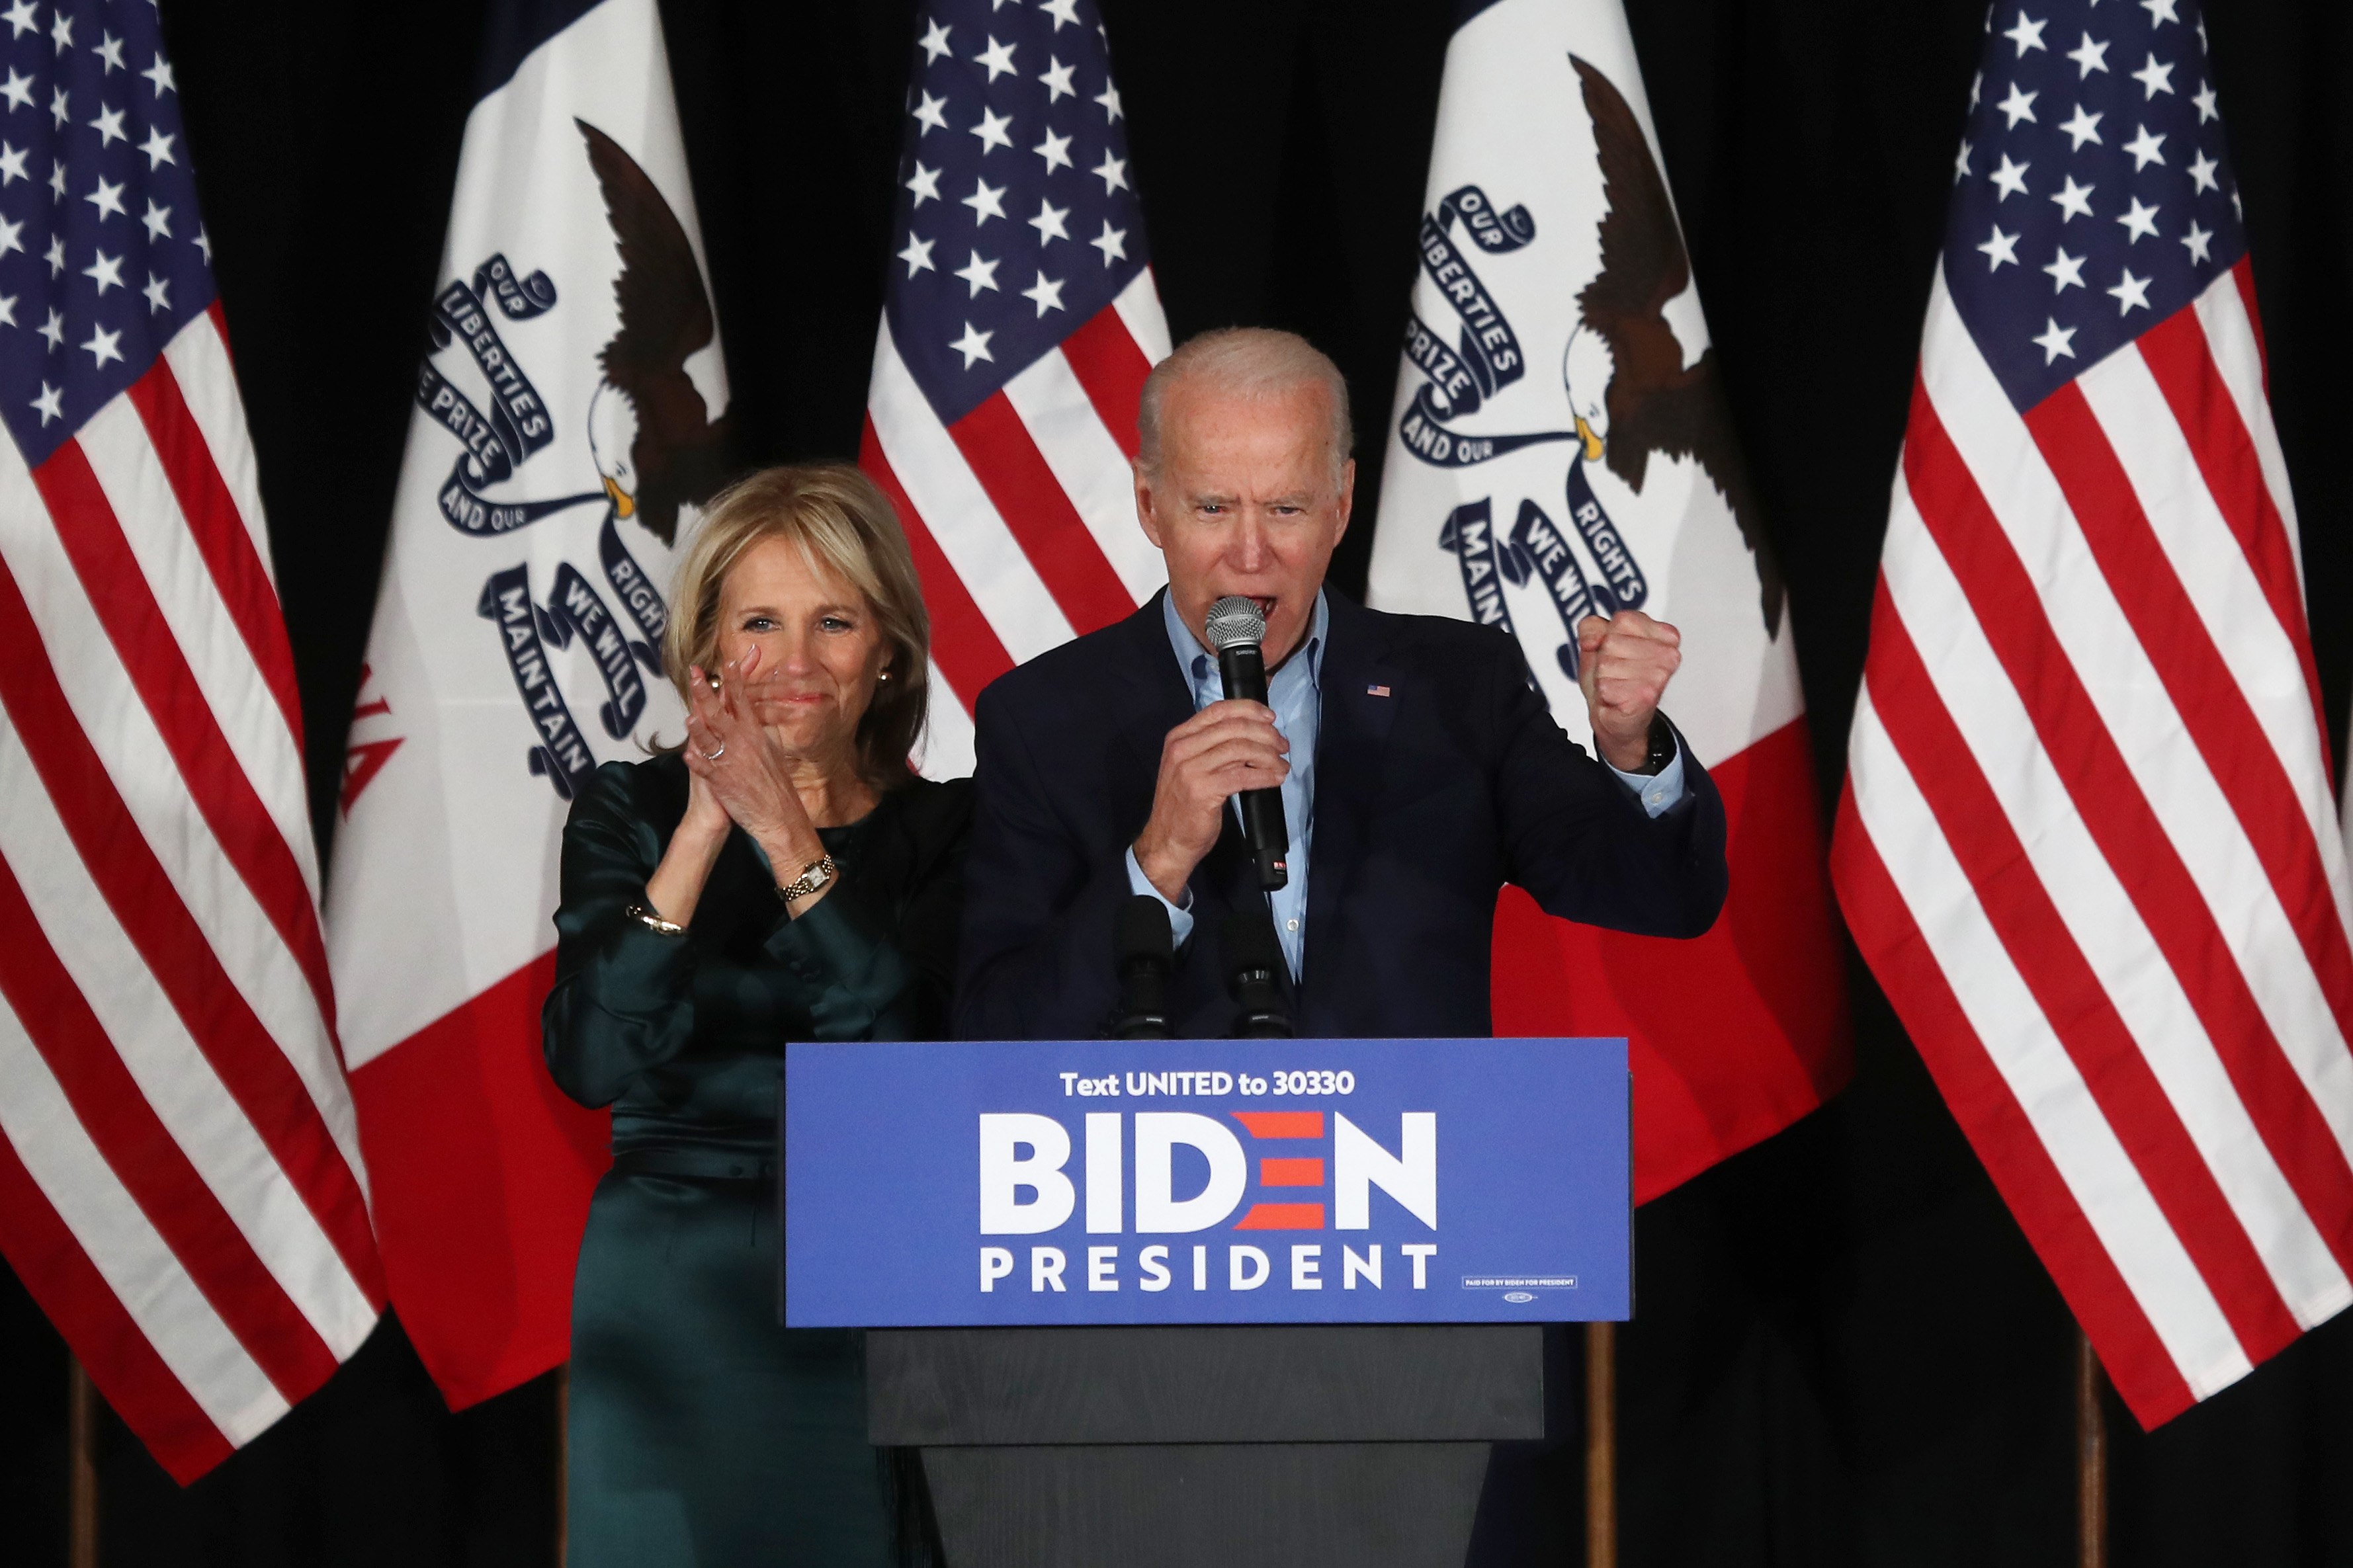 DES MOINES, IOWA - FEBRUARY 03: Democratic presidential candidate former Vice President Joe Biden and wife Dr. Jill Biden greet supporters at a caucus night watch party on February 03, 2020 in Des Moines, Iowa. Iowa is the first contest in the 2020 presidential nominating process with the candidates then moving on to New Hampshire. (Photo by Justin Sullivan/Getty Images)